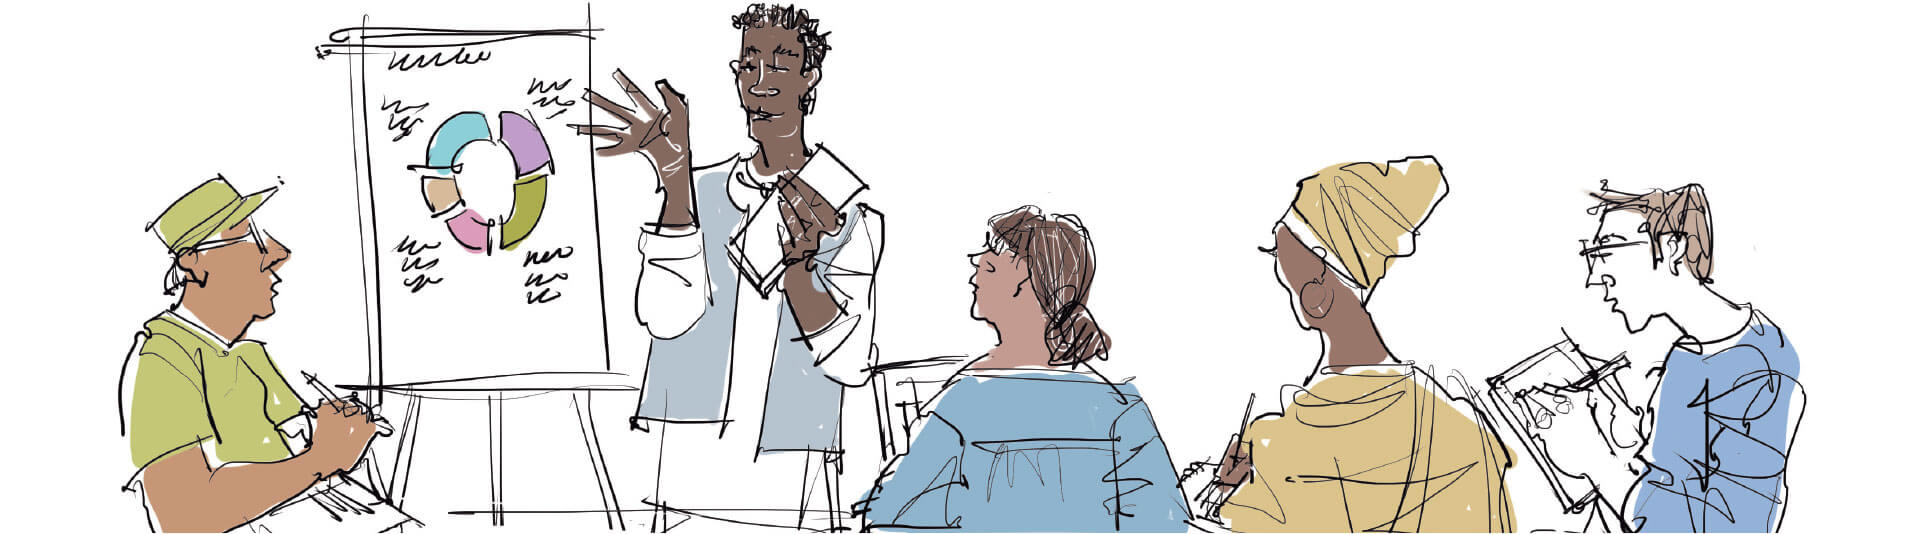 An illustration of five people. One is standing and presenting a pie chart on a flipchart. The other four are sitting and taking notes.